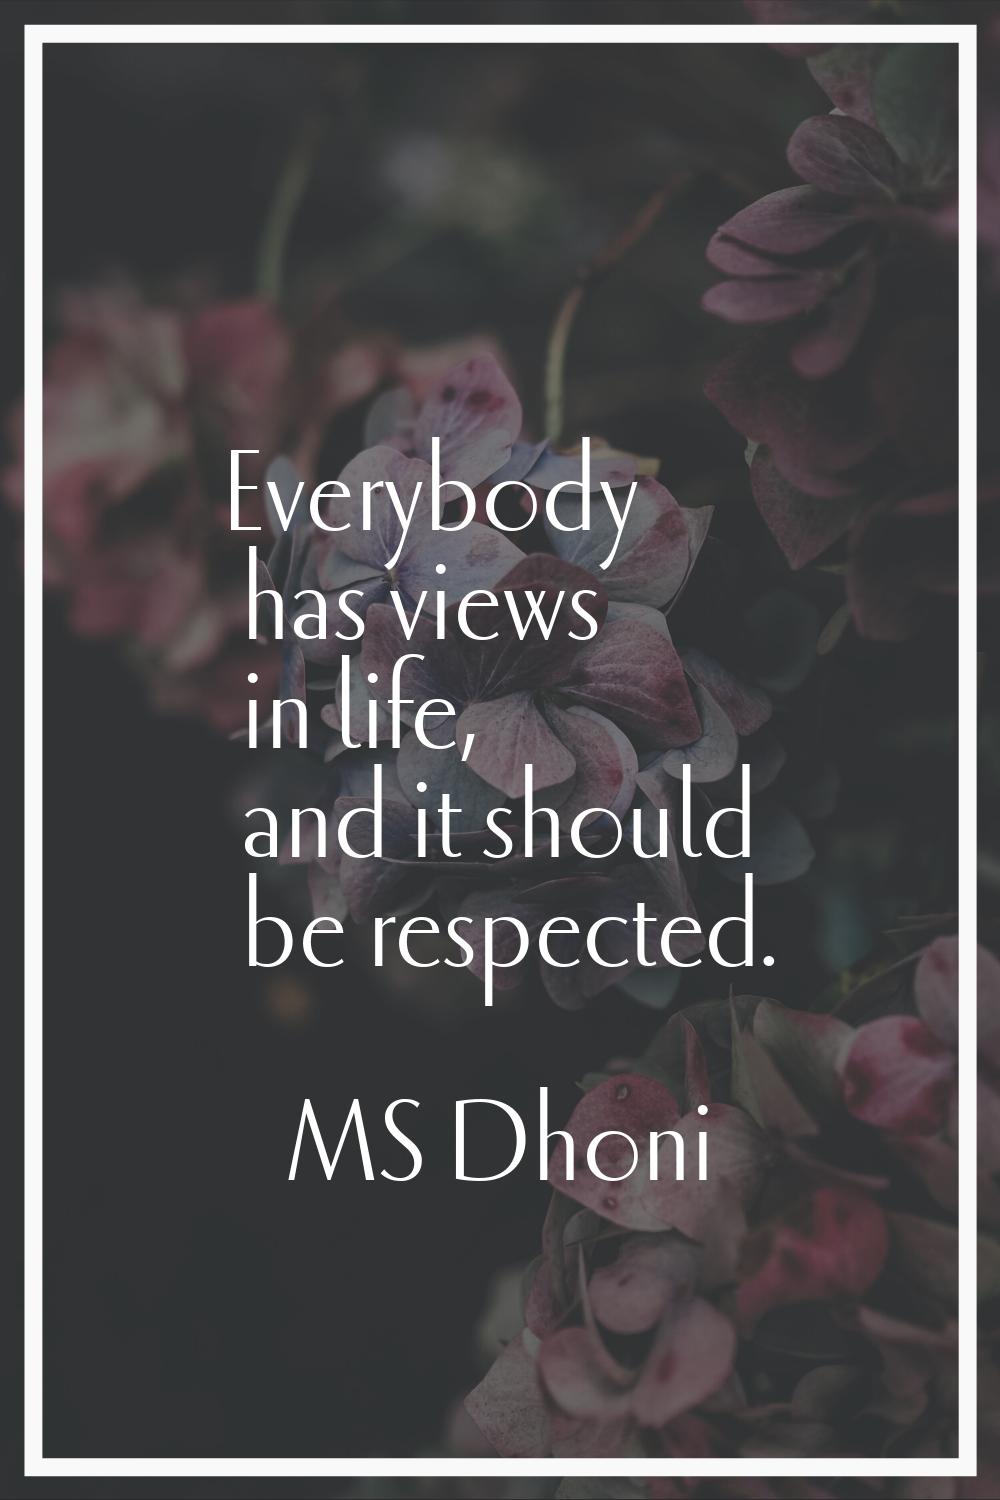 Everybody has views in life, and it should be respected.